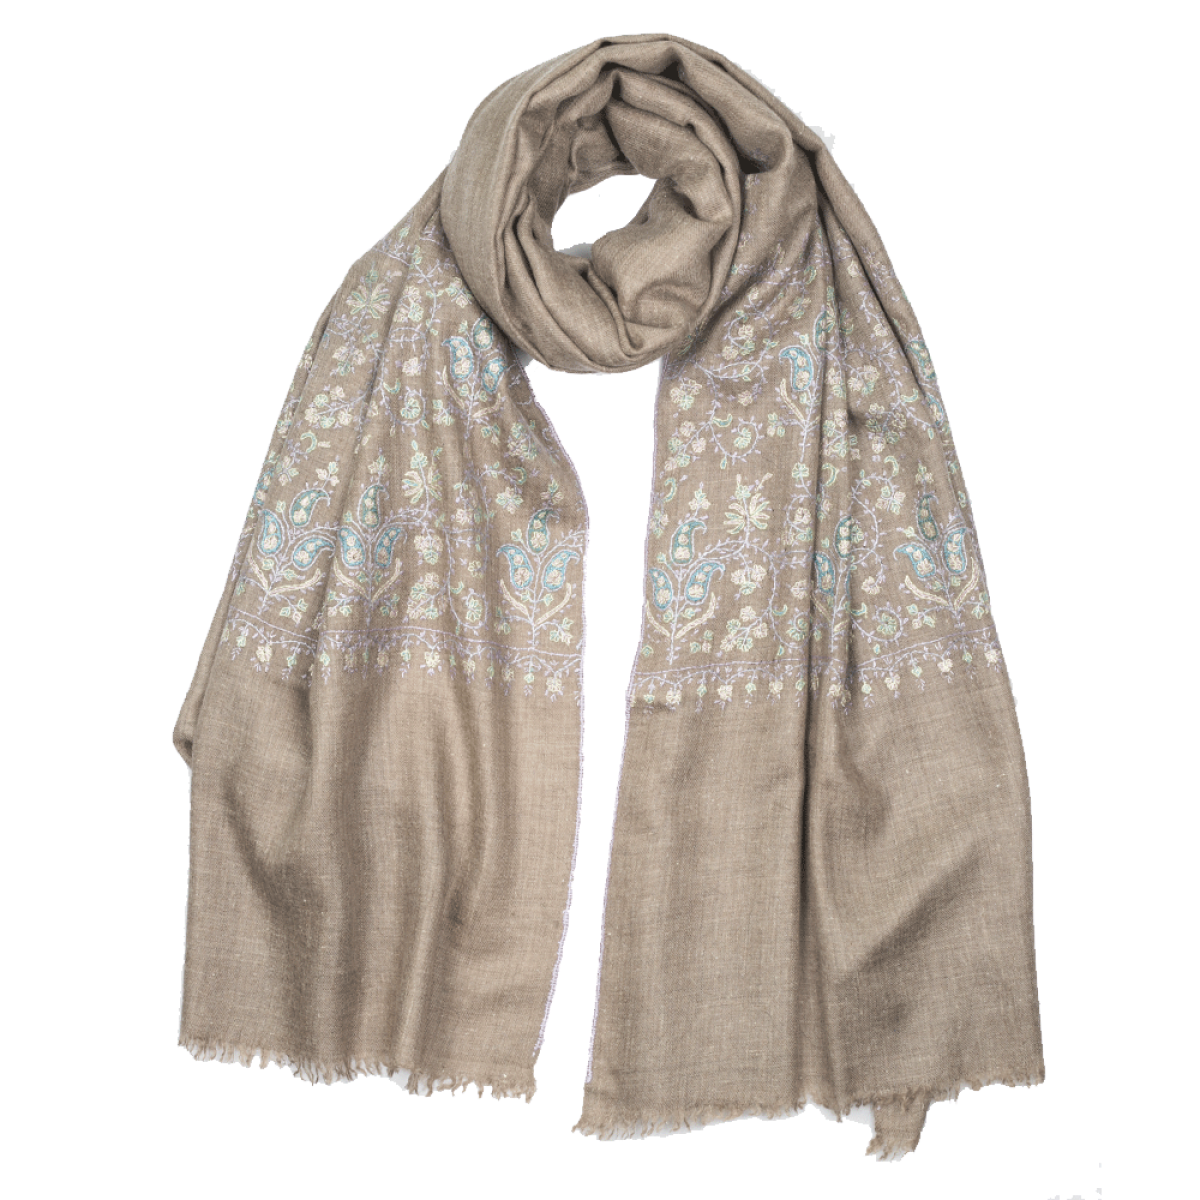 Embroidered Pashmina Stole - Natural & Lilac